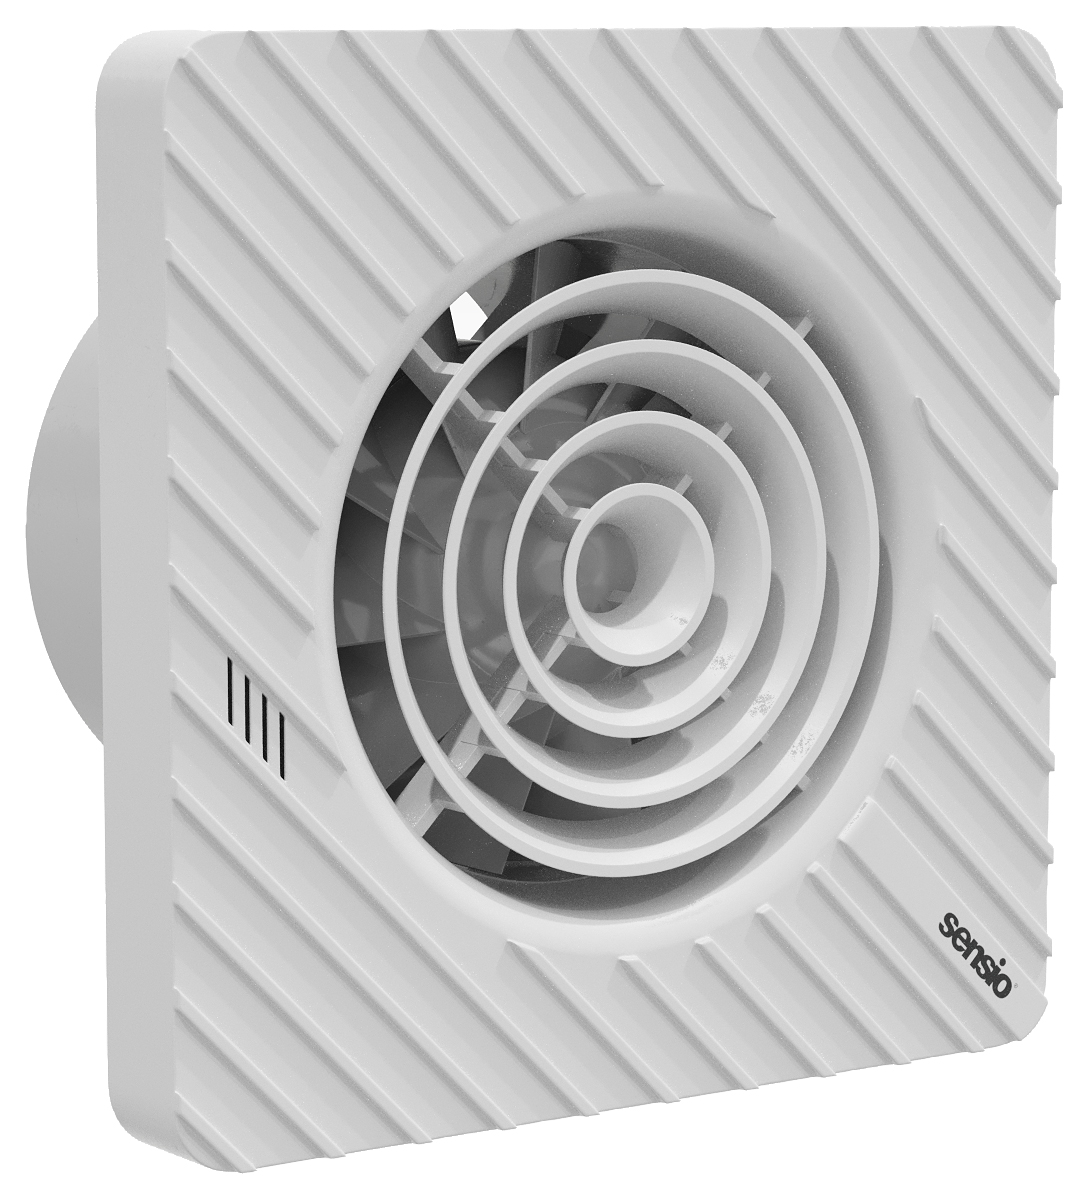 Image of Sensio Drax White Wall Ventilation Fan with Aquilo Ventilation Ducting Kit - ø100mm